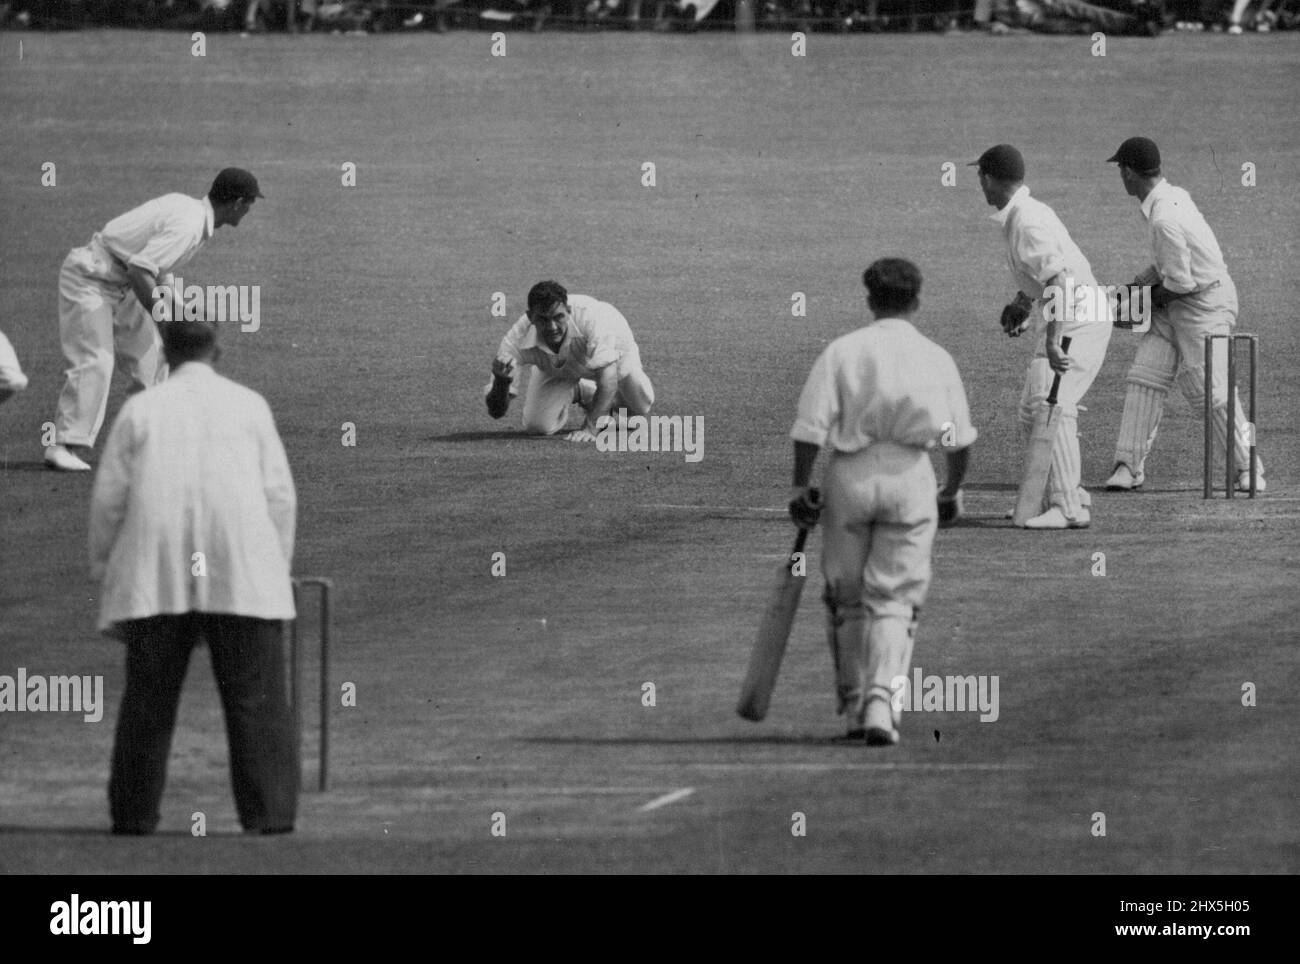 England V. The Rest At Canterbury. T.P. Smith (Essex) edges D. Wright (Kent) into the slips. Bedser (Surrey) fields the ball and appeals for a catch, but the ball had grounded. The Test Trial continued to-day (Thursday) at Canterbury, with N.W.D. Yardley of Yorkshire leading England against the Rest, captained by S.C. Griffith of Sussex. July 11, 1946. Stock Photo